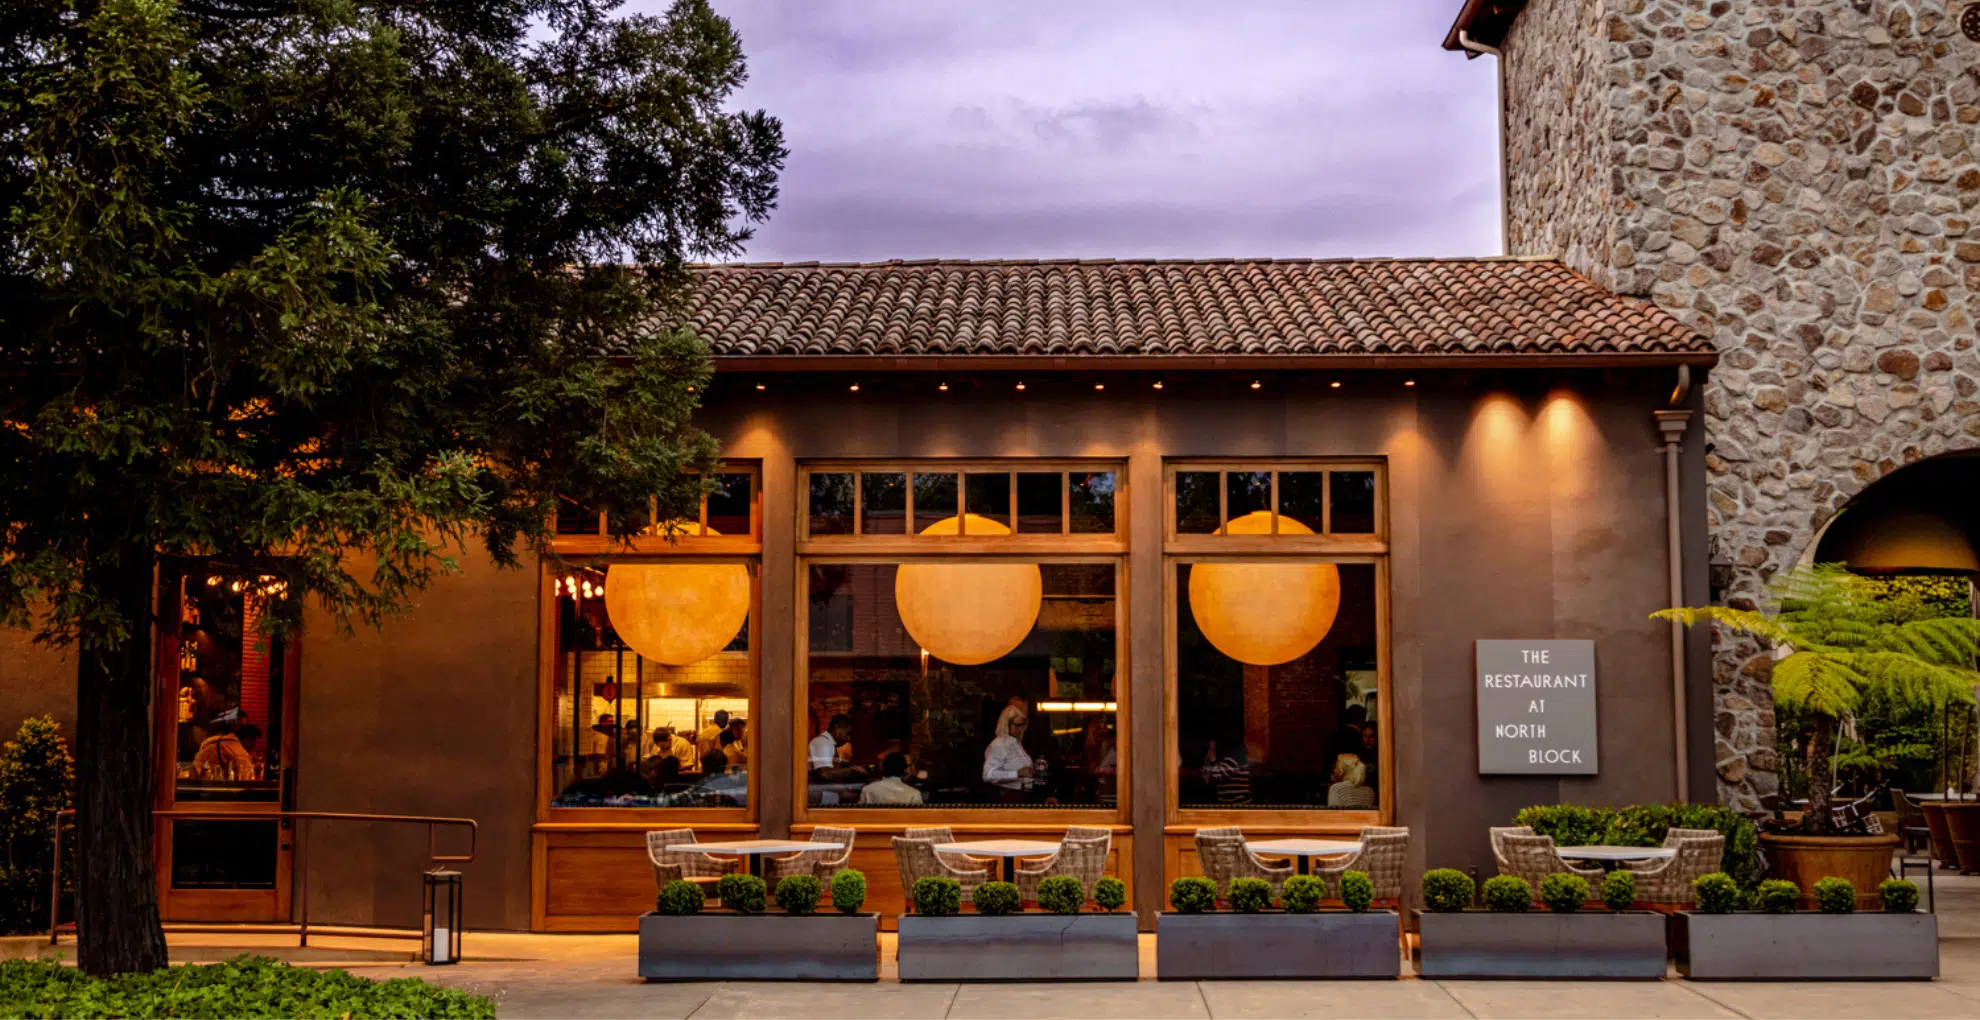 The Restaurant at North Block Yountville